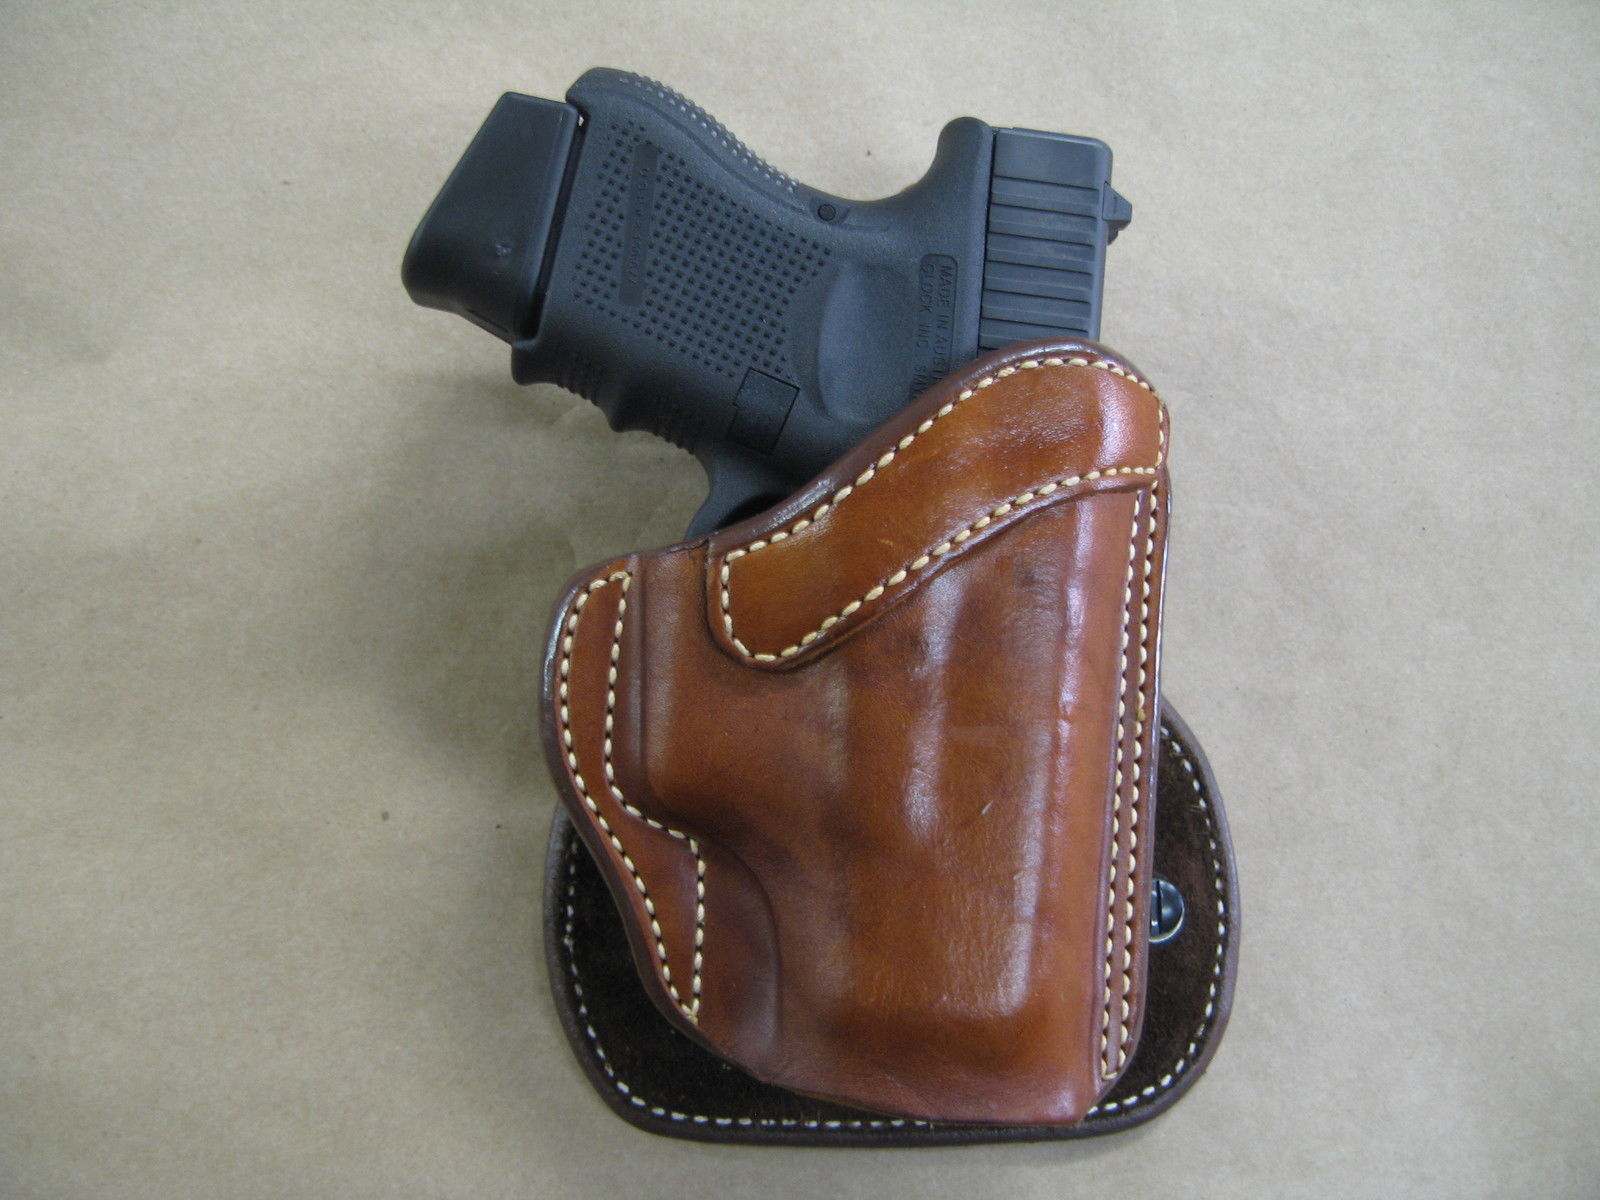 Premium Leather OWB Paddle Holster With Open Top Fits Zigana Px-9 4" BBL #8047# 